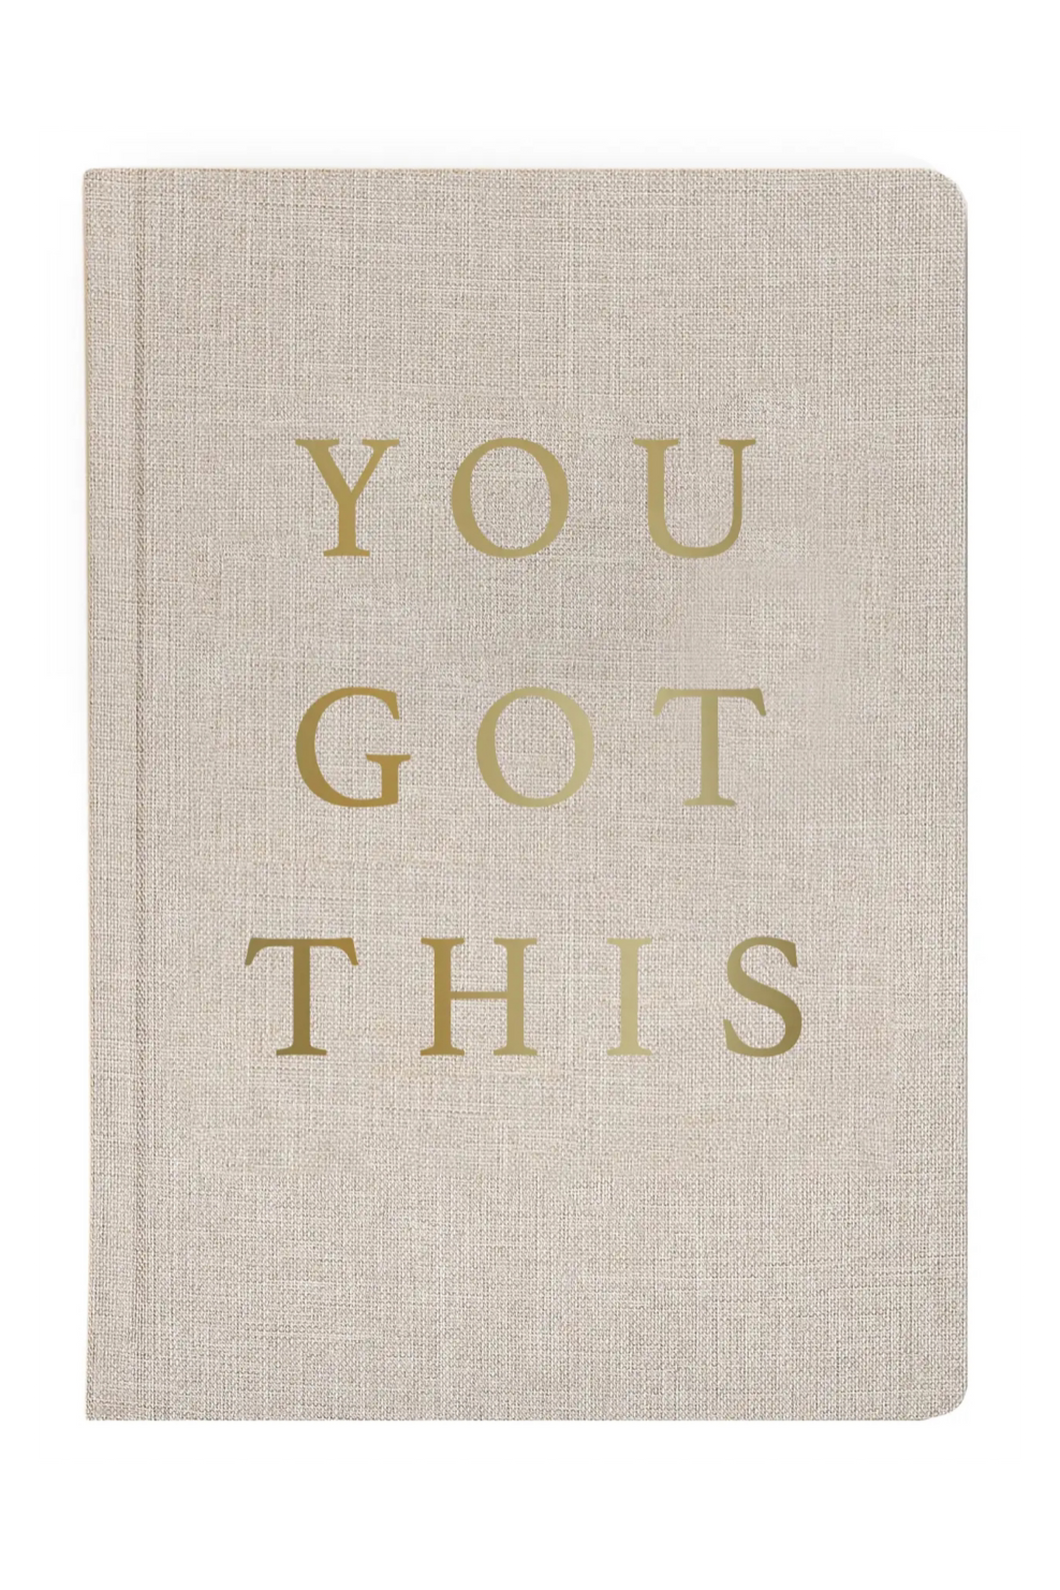 YOU GOT THIS FABRIC JOURNAL